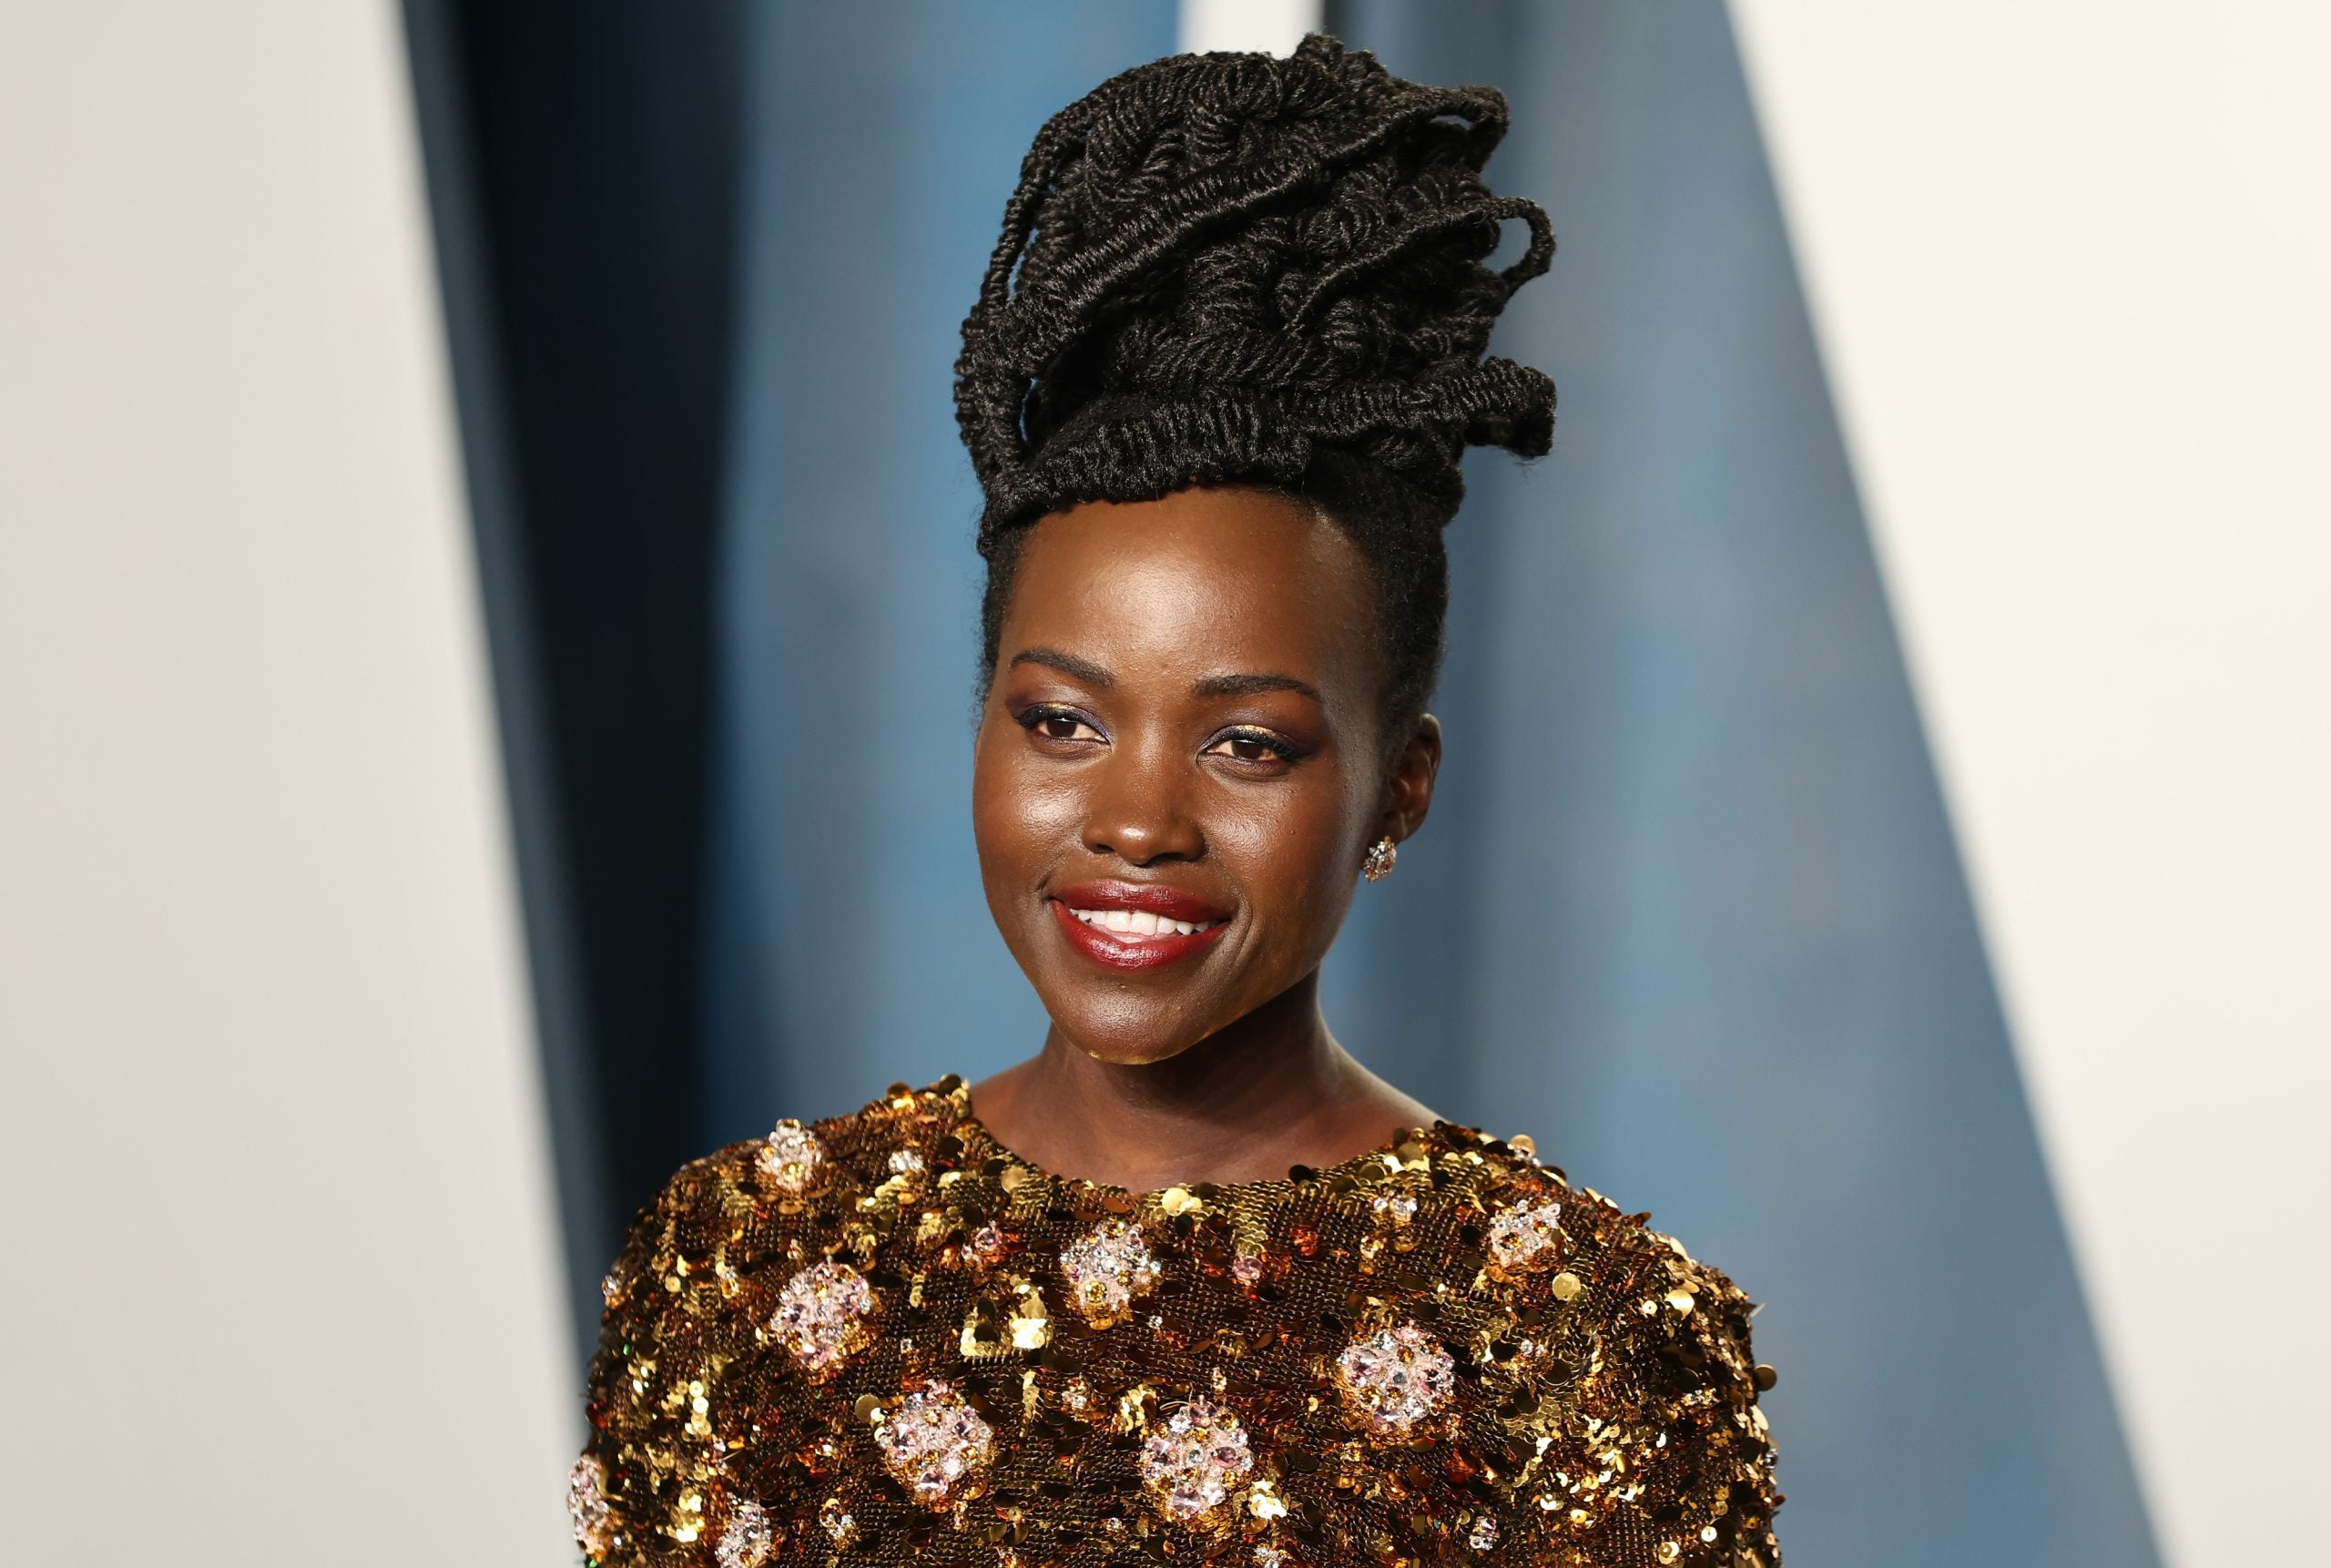 Lupita Nyong’o Says Filming ‘Wakanda Forever’ While Grieving Chadwick Boseman Was 'Very Therapeutic'